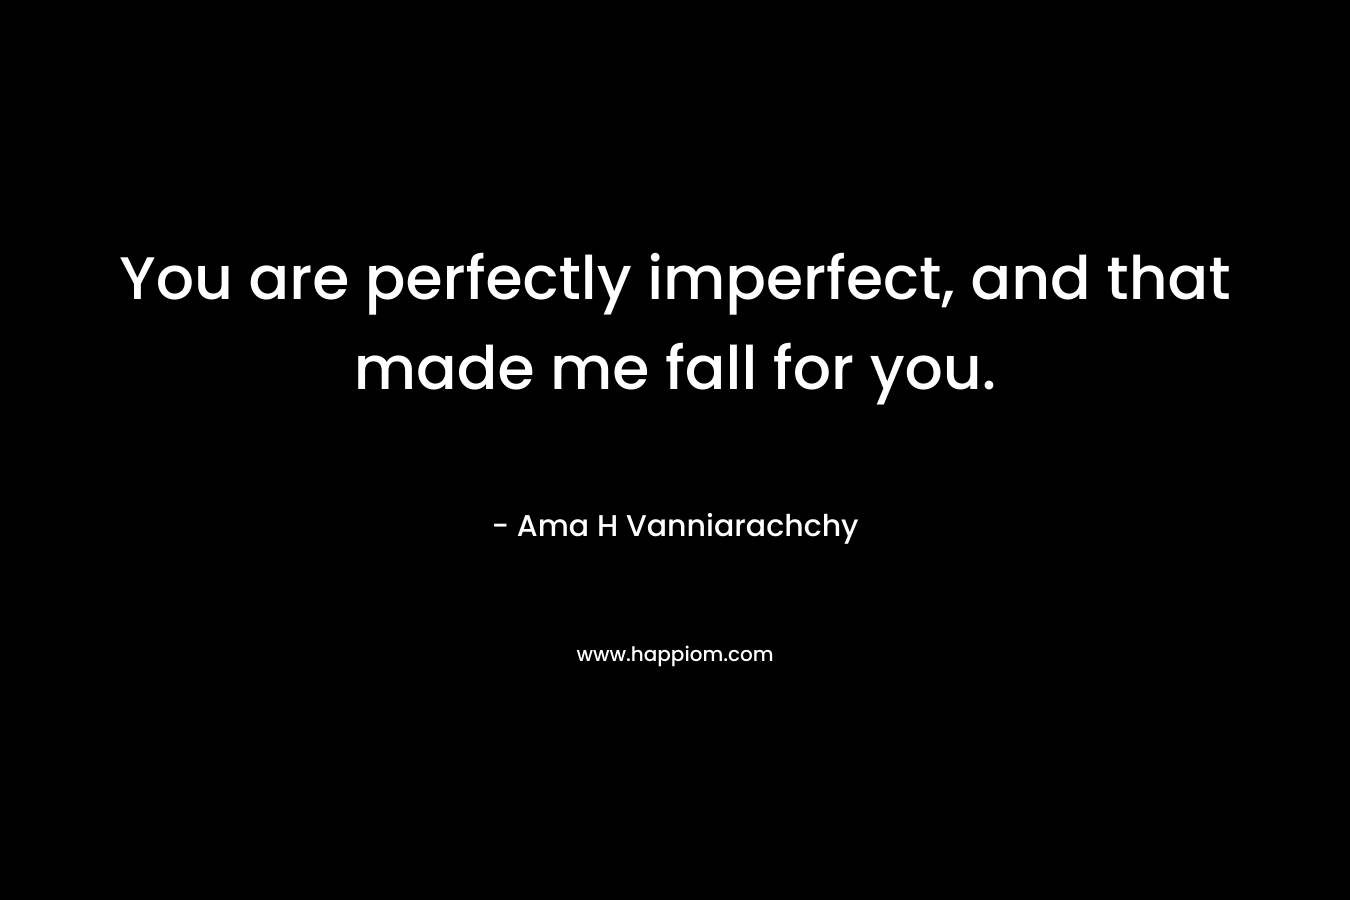 You are perfectly imperfect, and that made me fall for you. – Ama H Vanniarachchy